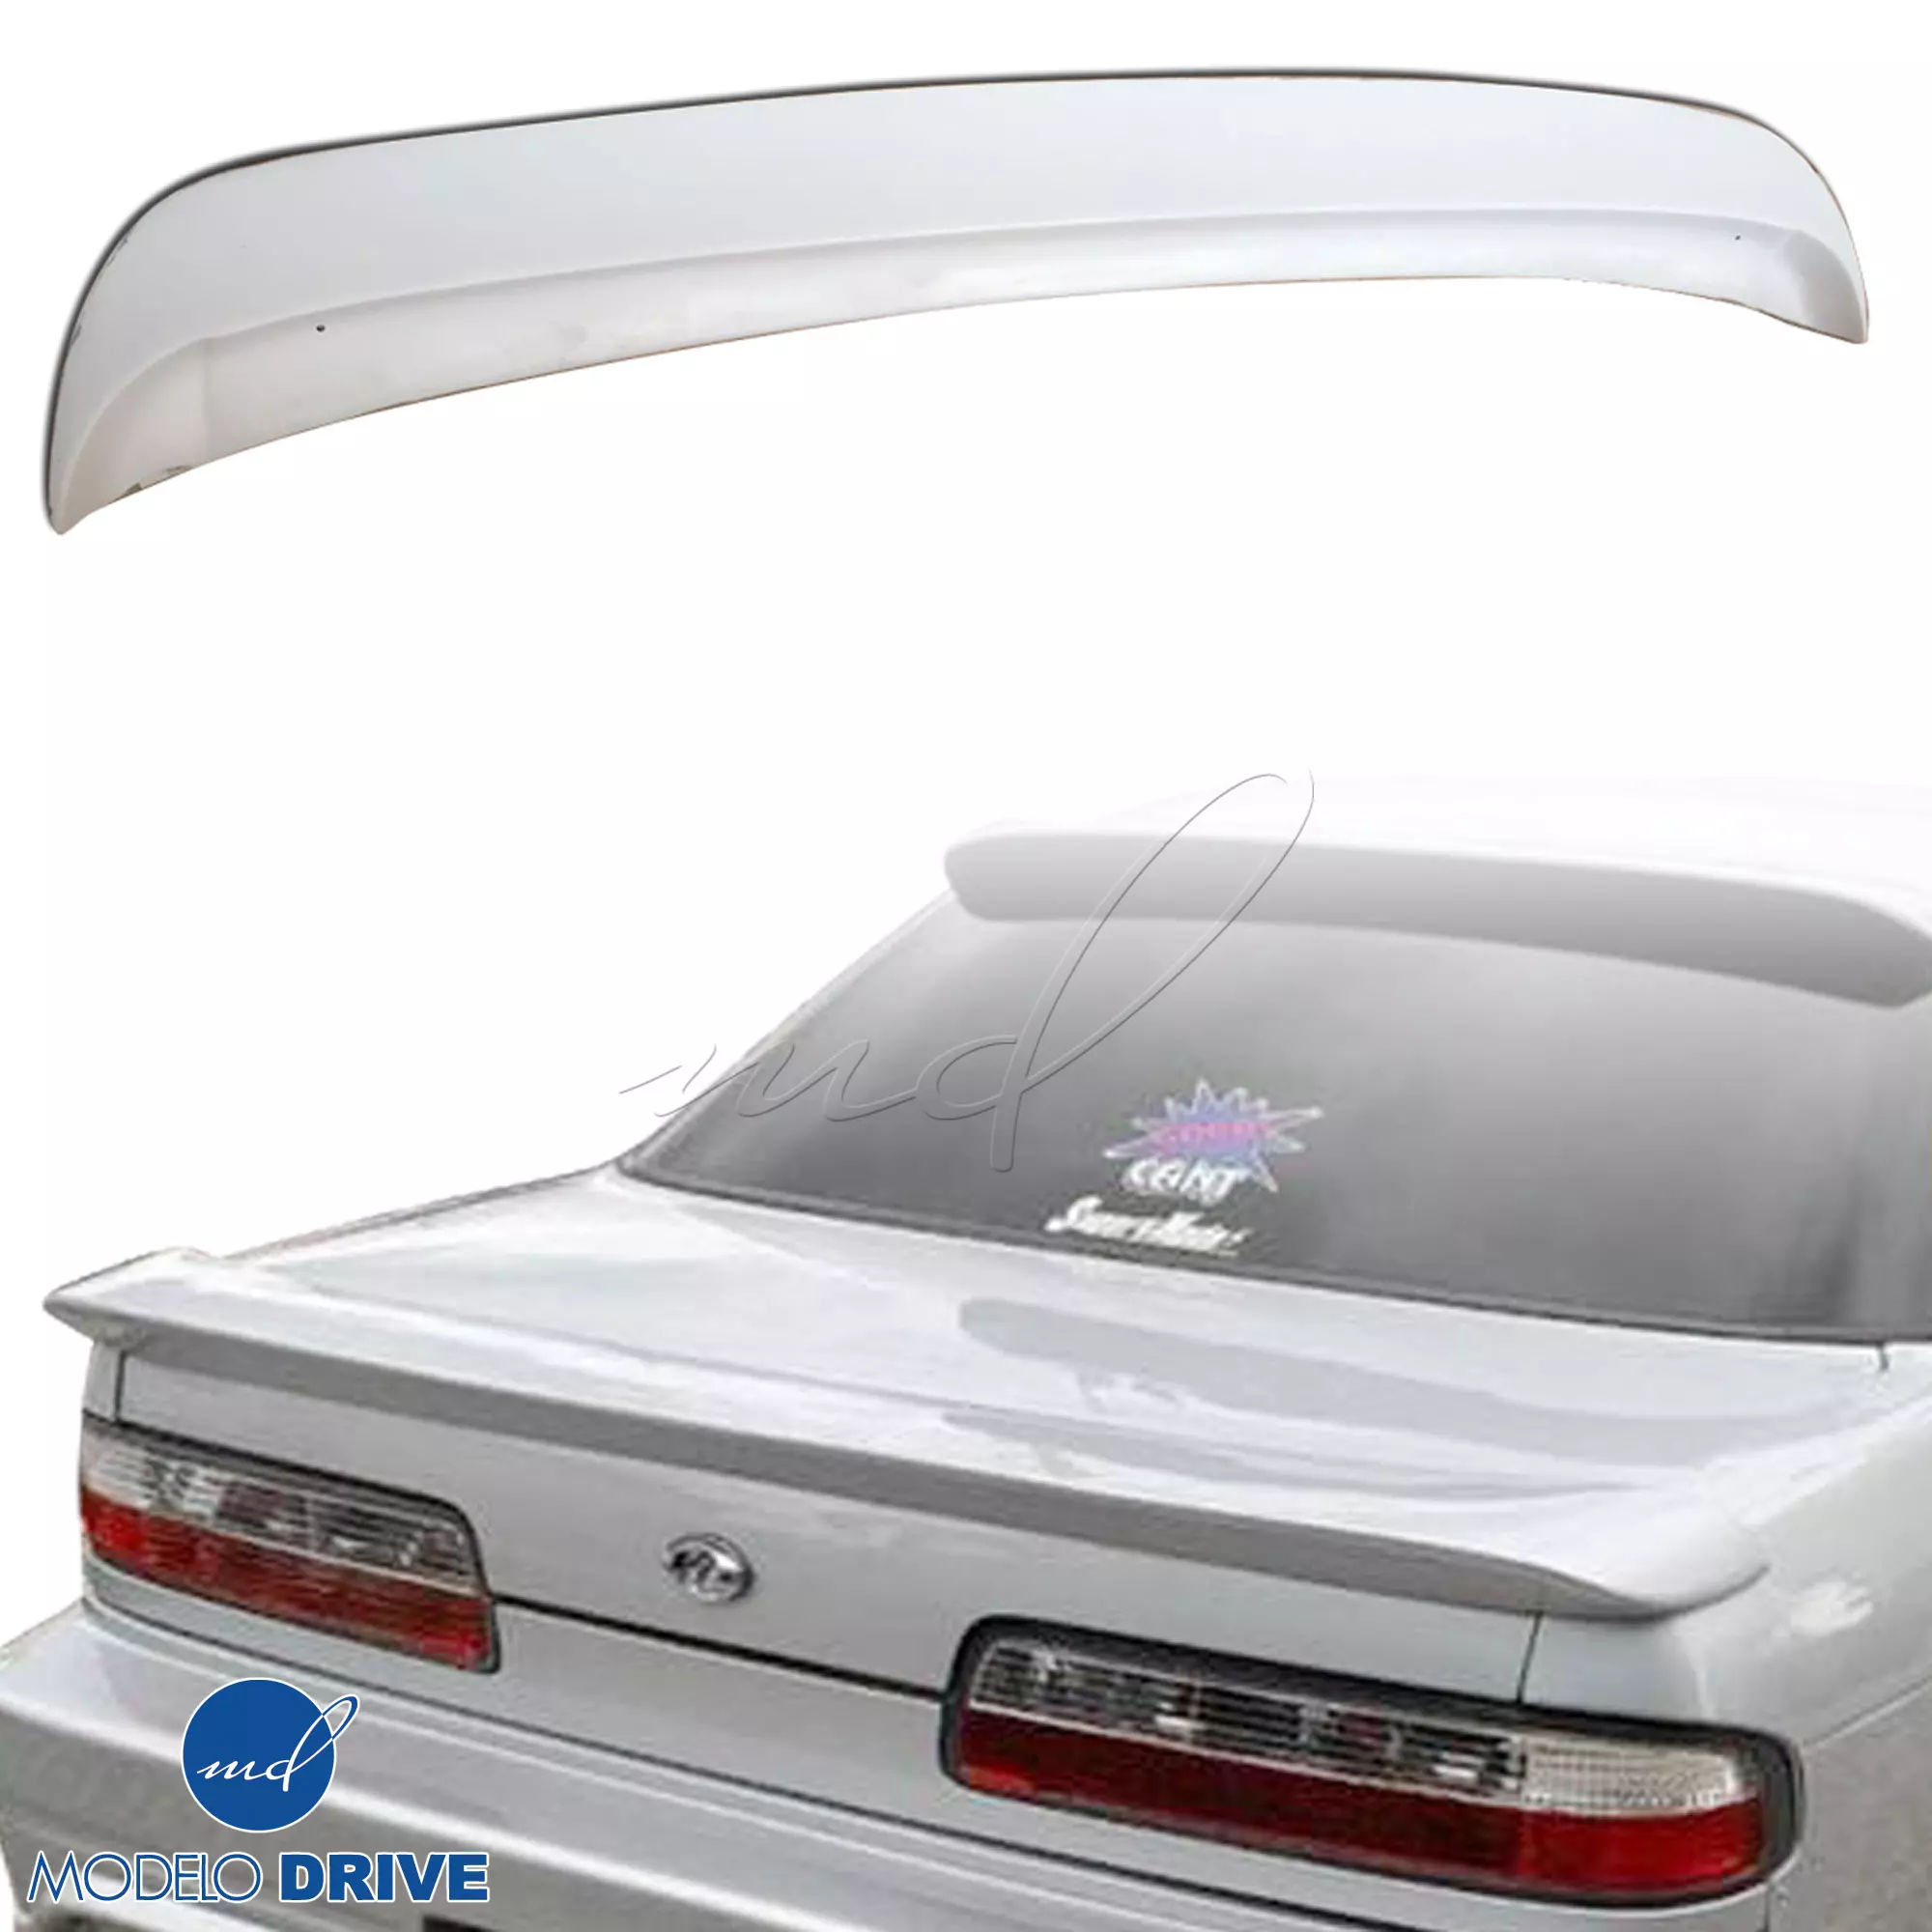 ModeloDrive FRP DMA Trunk Spoiler Wing > Nissan 240SX 1989-1994 > 2dr Coupe - Image 8